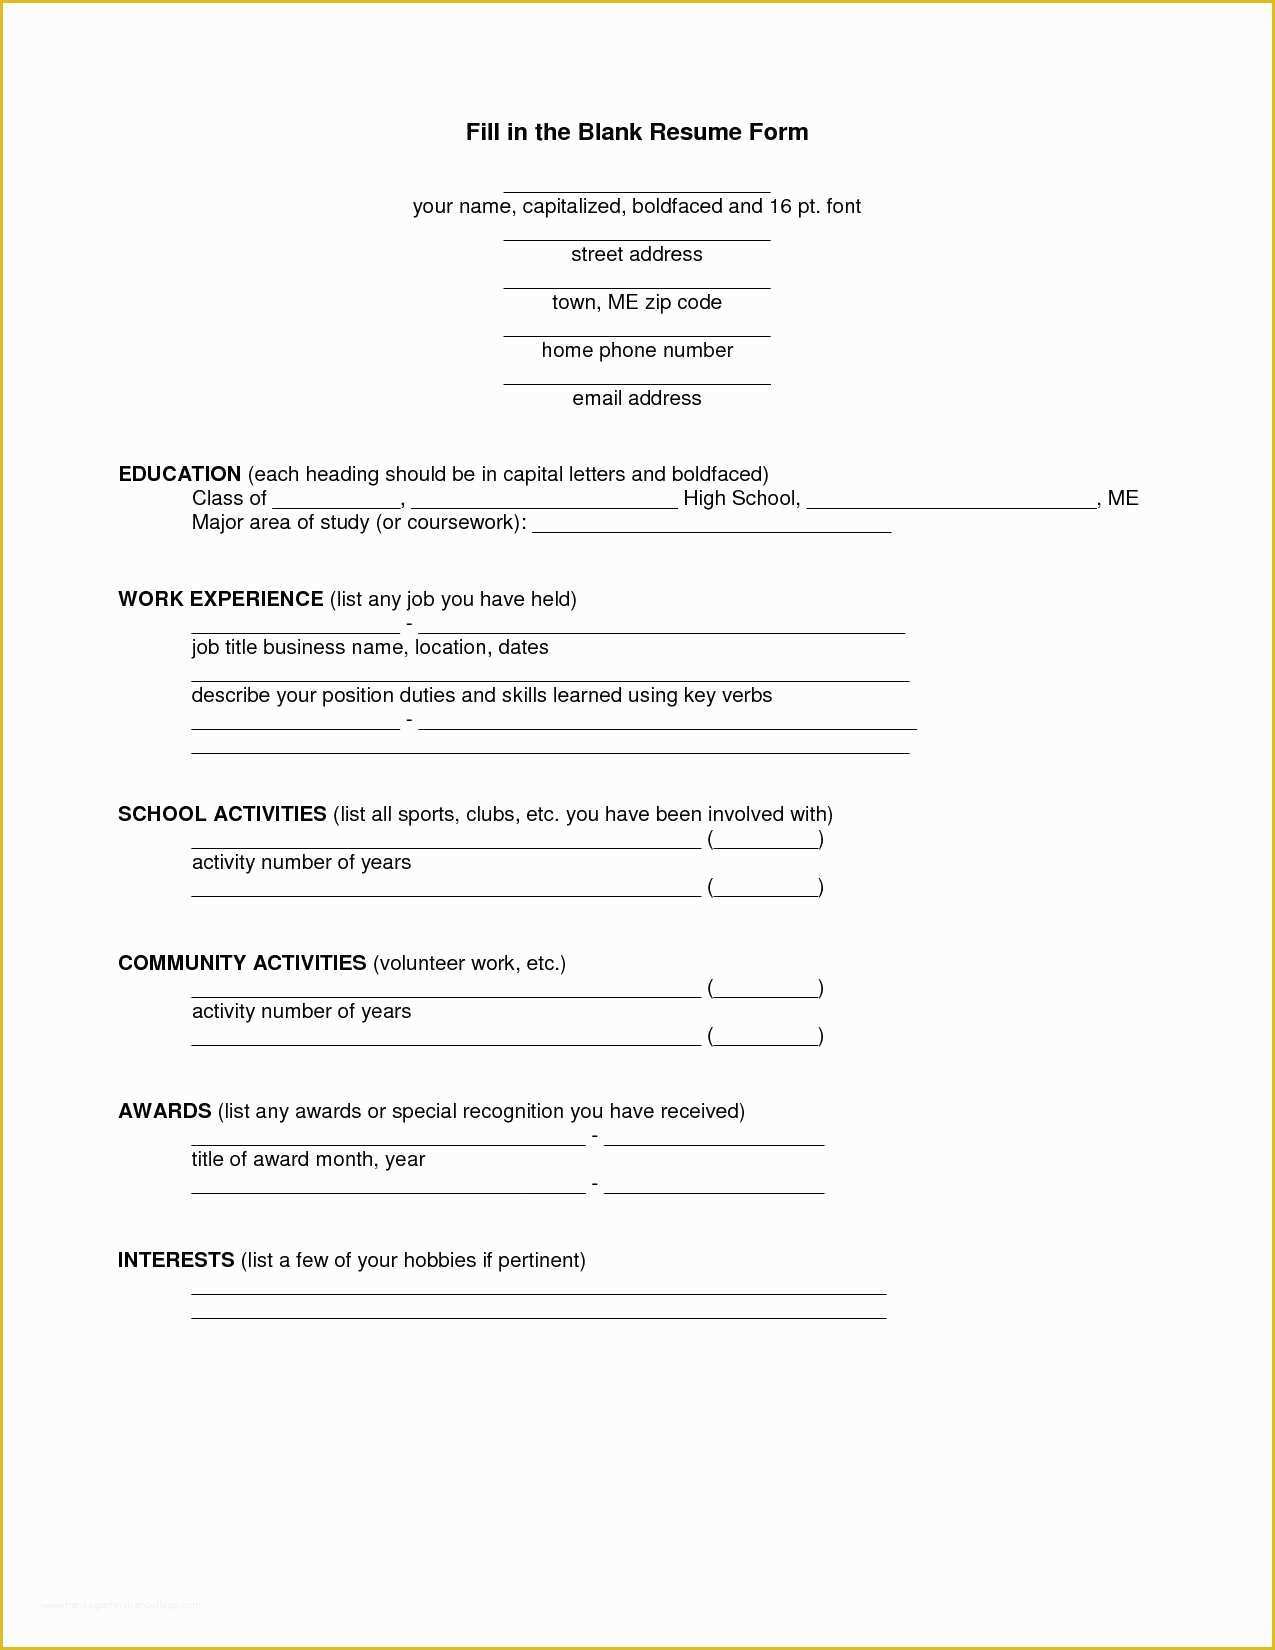 Free Resume Outline Template Of Free Resume Templates Cv Word Blank Students High School